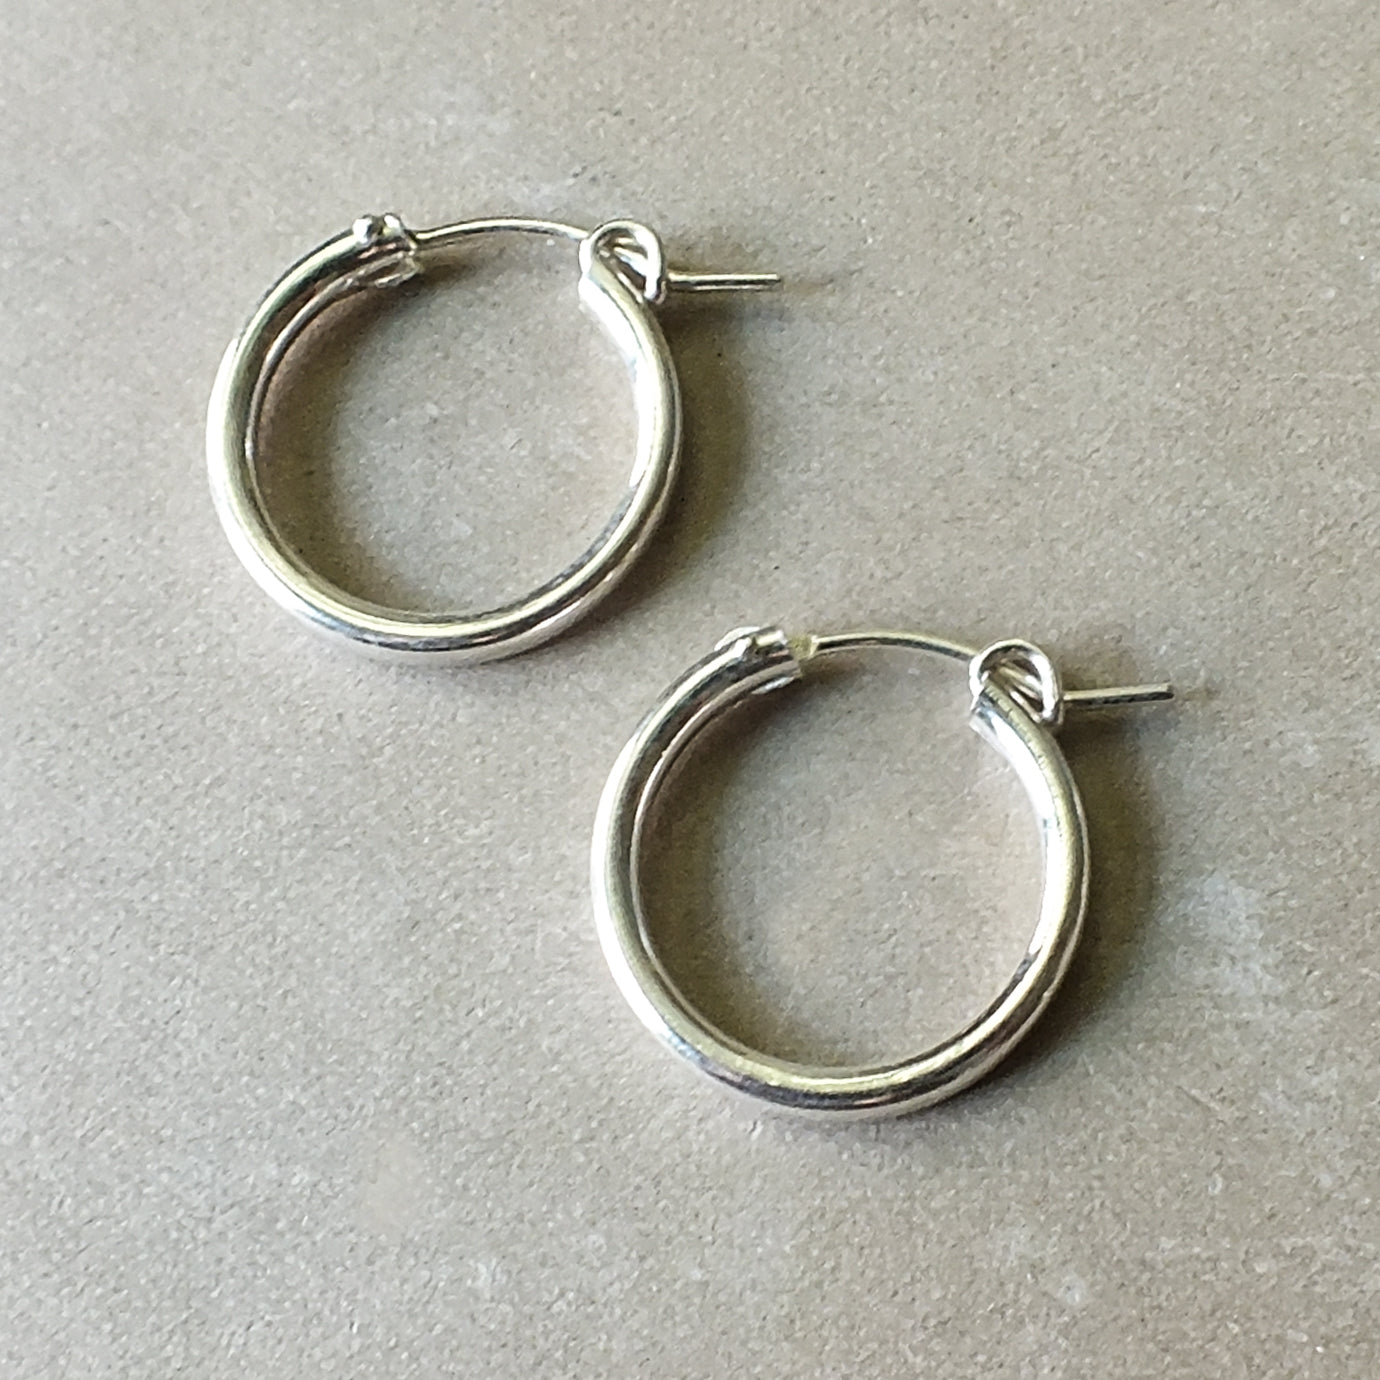 A pair of Becoming Jewelry Everyday Hoop Earrings, large on a gray background.